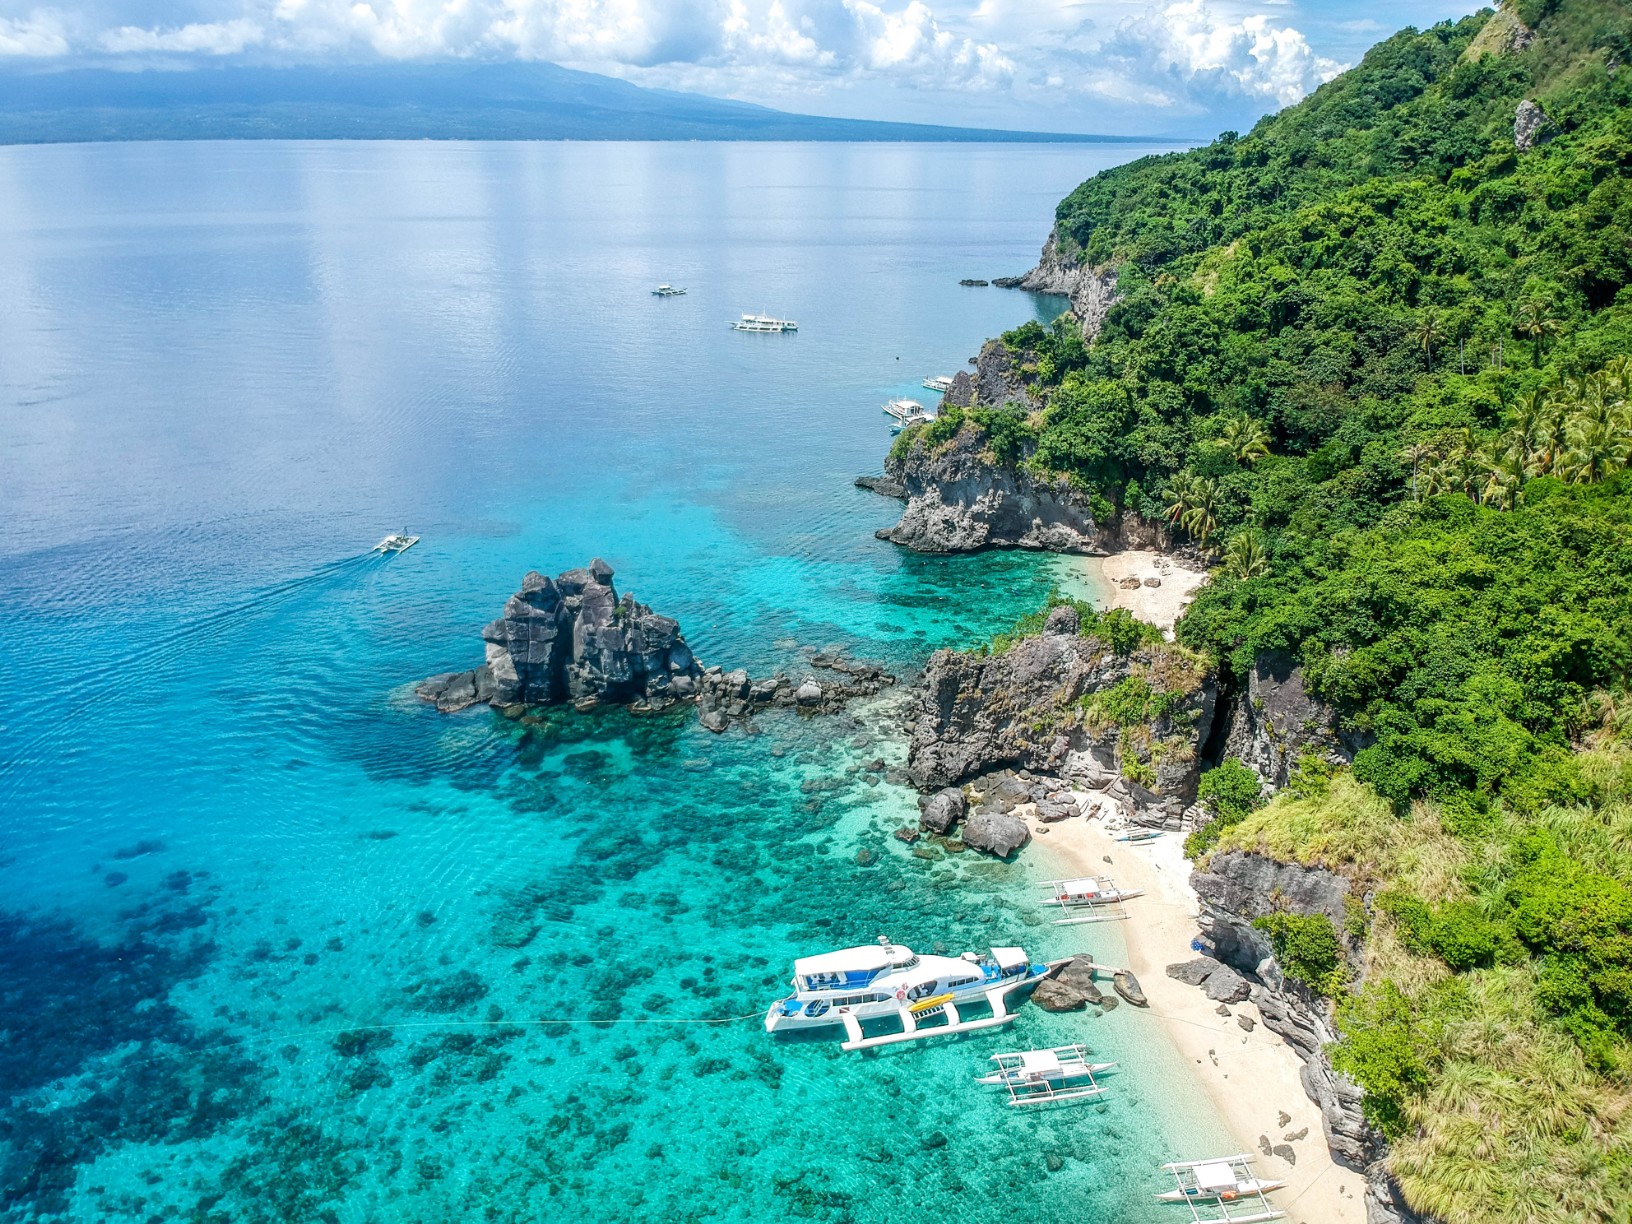 Negros Island in the Philippines